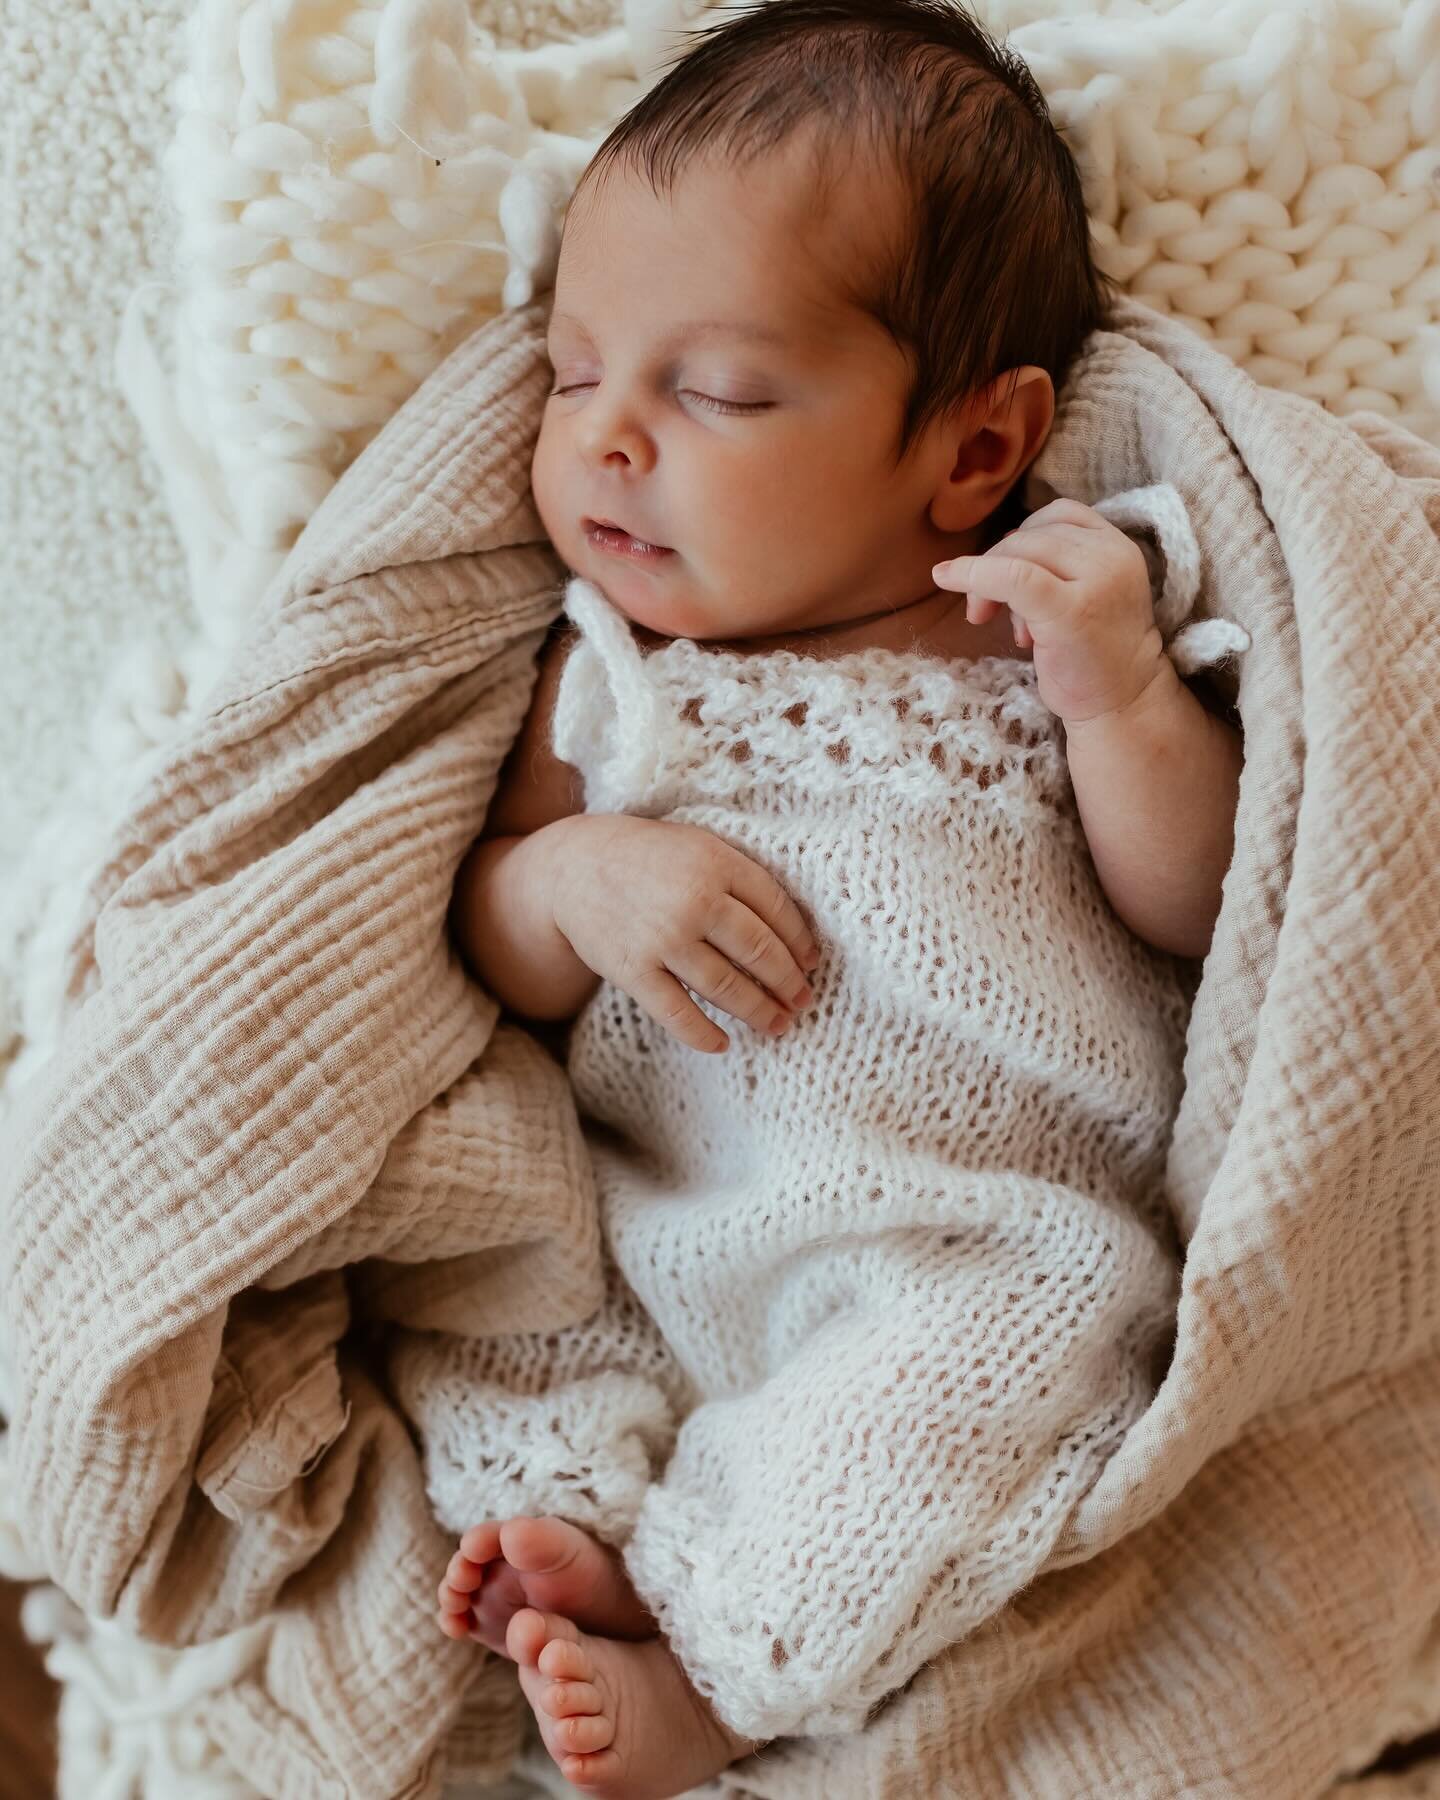 The crazy thing about the newborn stage is that every single day those little babies change right before your eyes. They grow and develop so quickly in the beginning and it&rsquo;s so hard to savor it because you&rsquo;re so utterly exhausted. If you